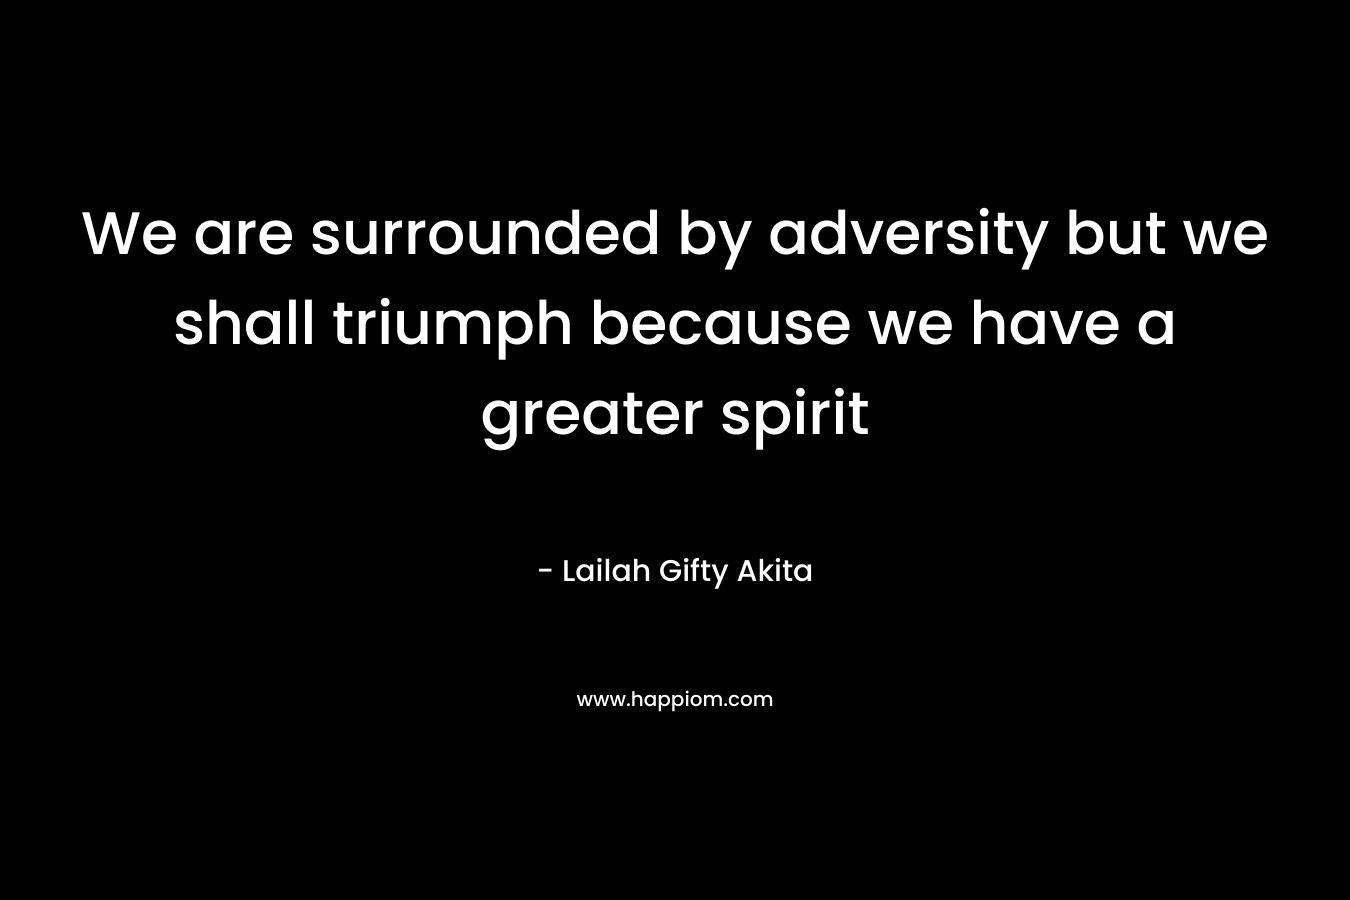 We are surrounded by adversity but we shall triumph because we have a greater spirit